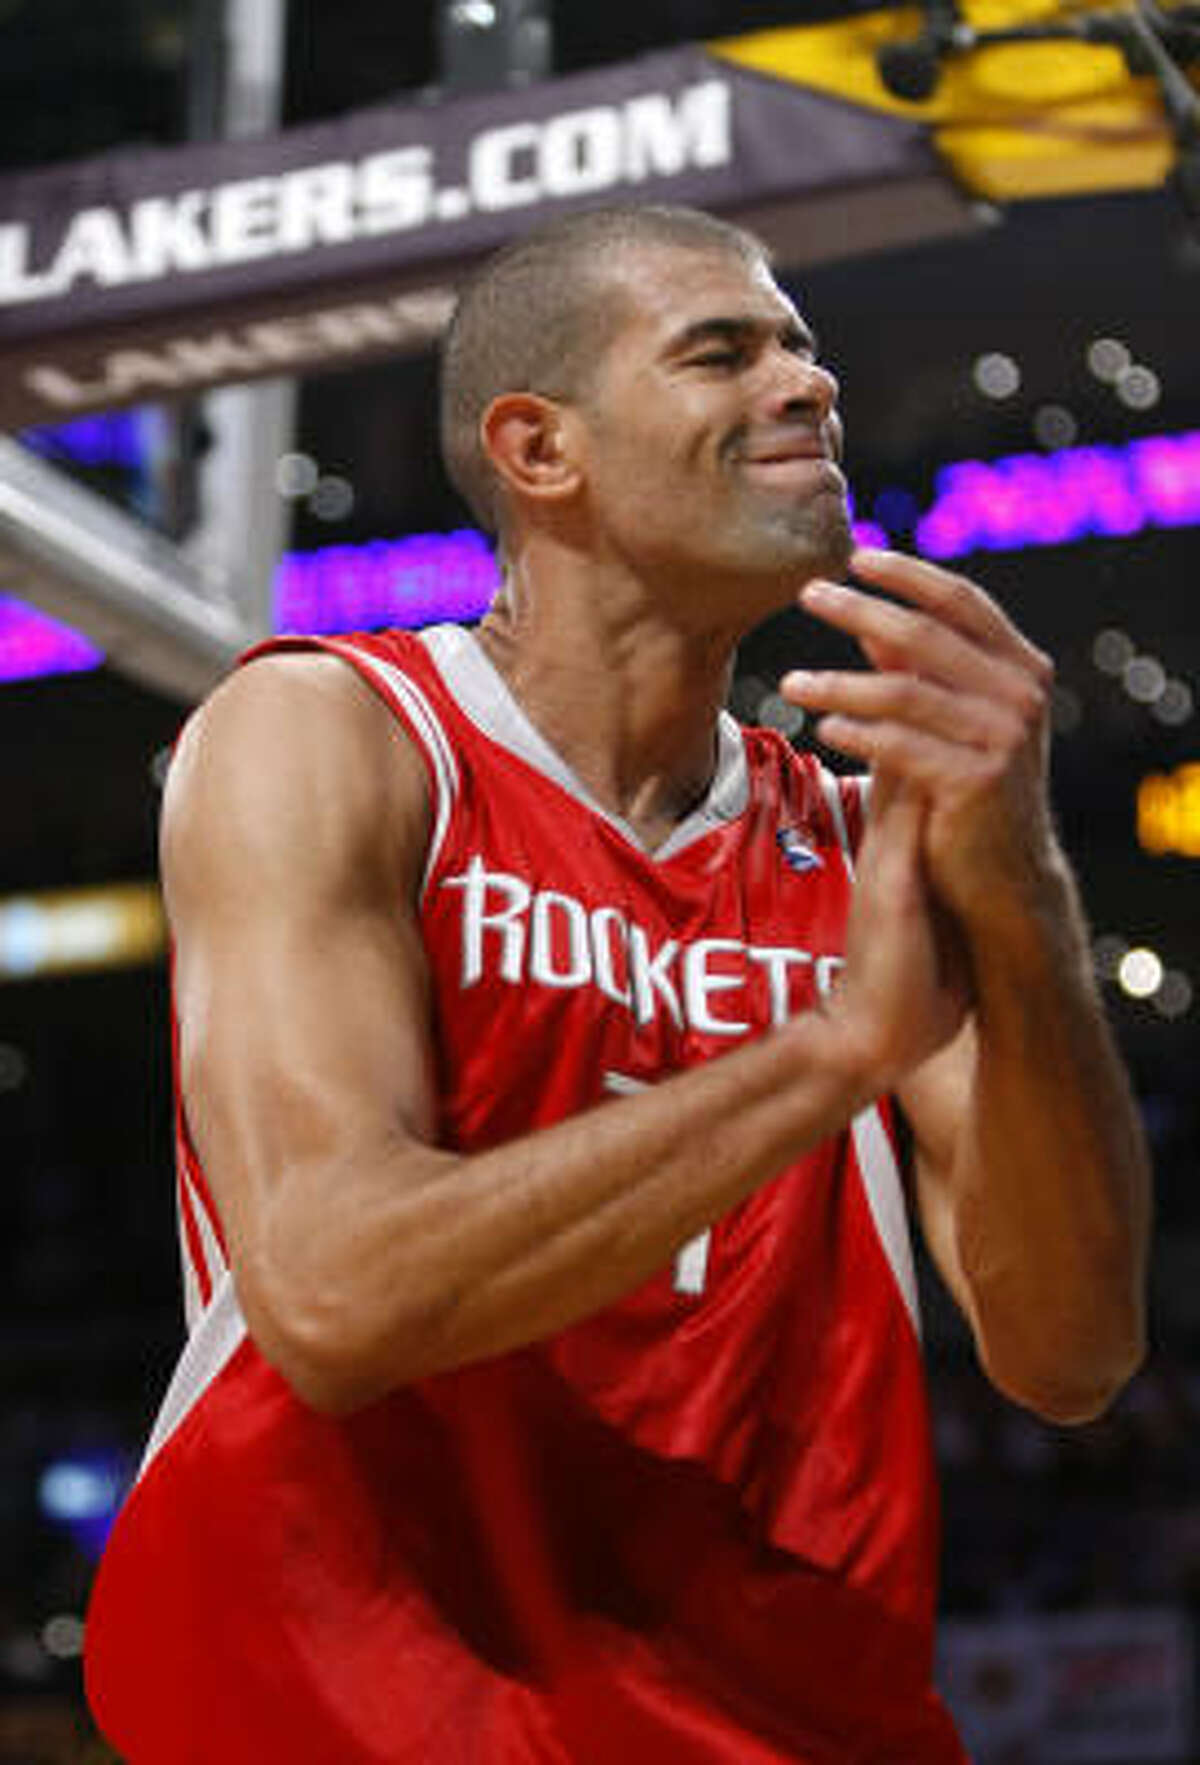 Shane Battier, guard/forward Battier has averaged 10 points and 4.8 rebounds per game during his eight-year career.